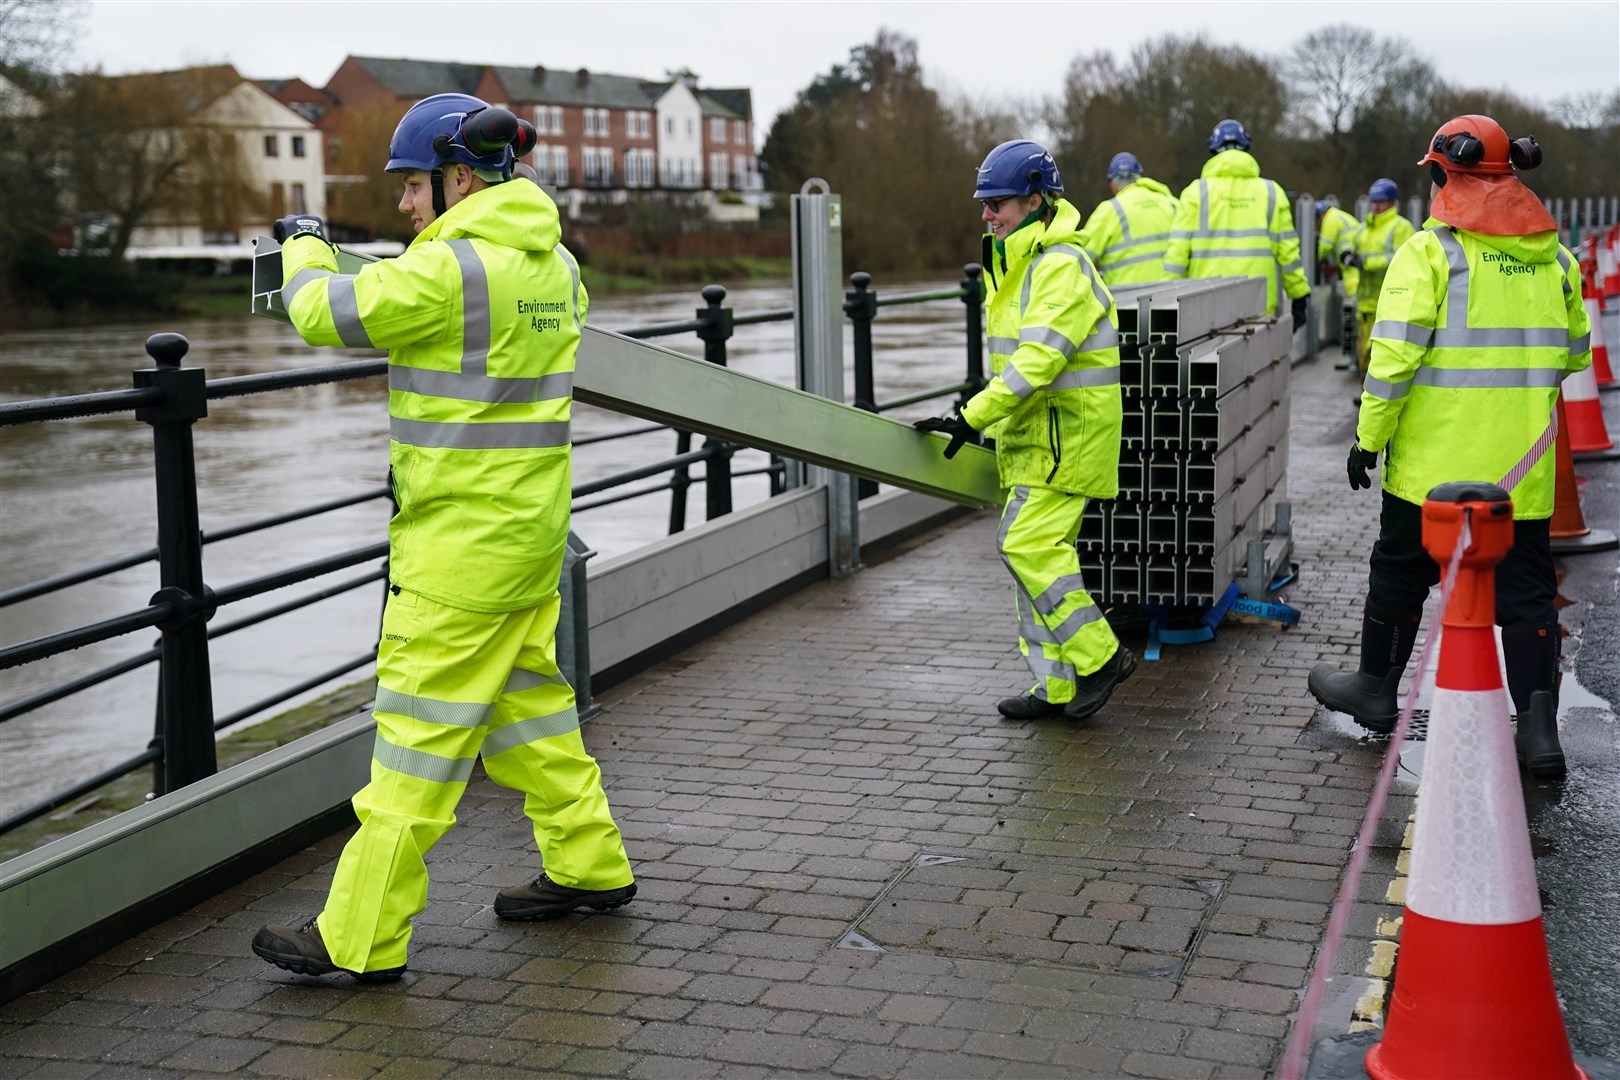 Workers from the Environment Agency installing flood defences in Bewdley, Worcestershire, on Tuesday (Jacob King/PA)